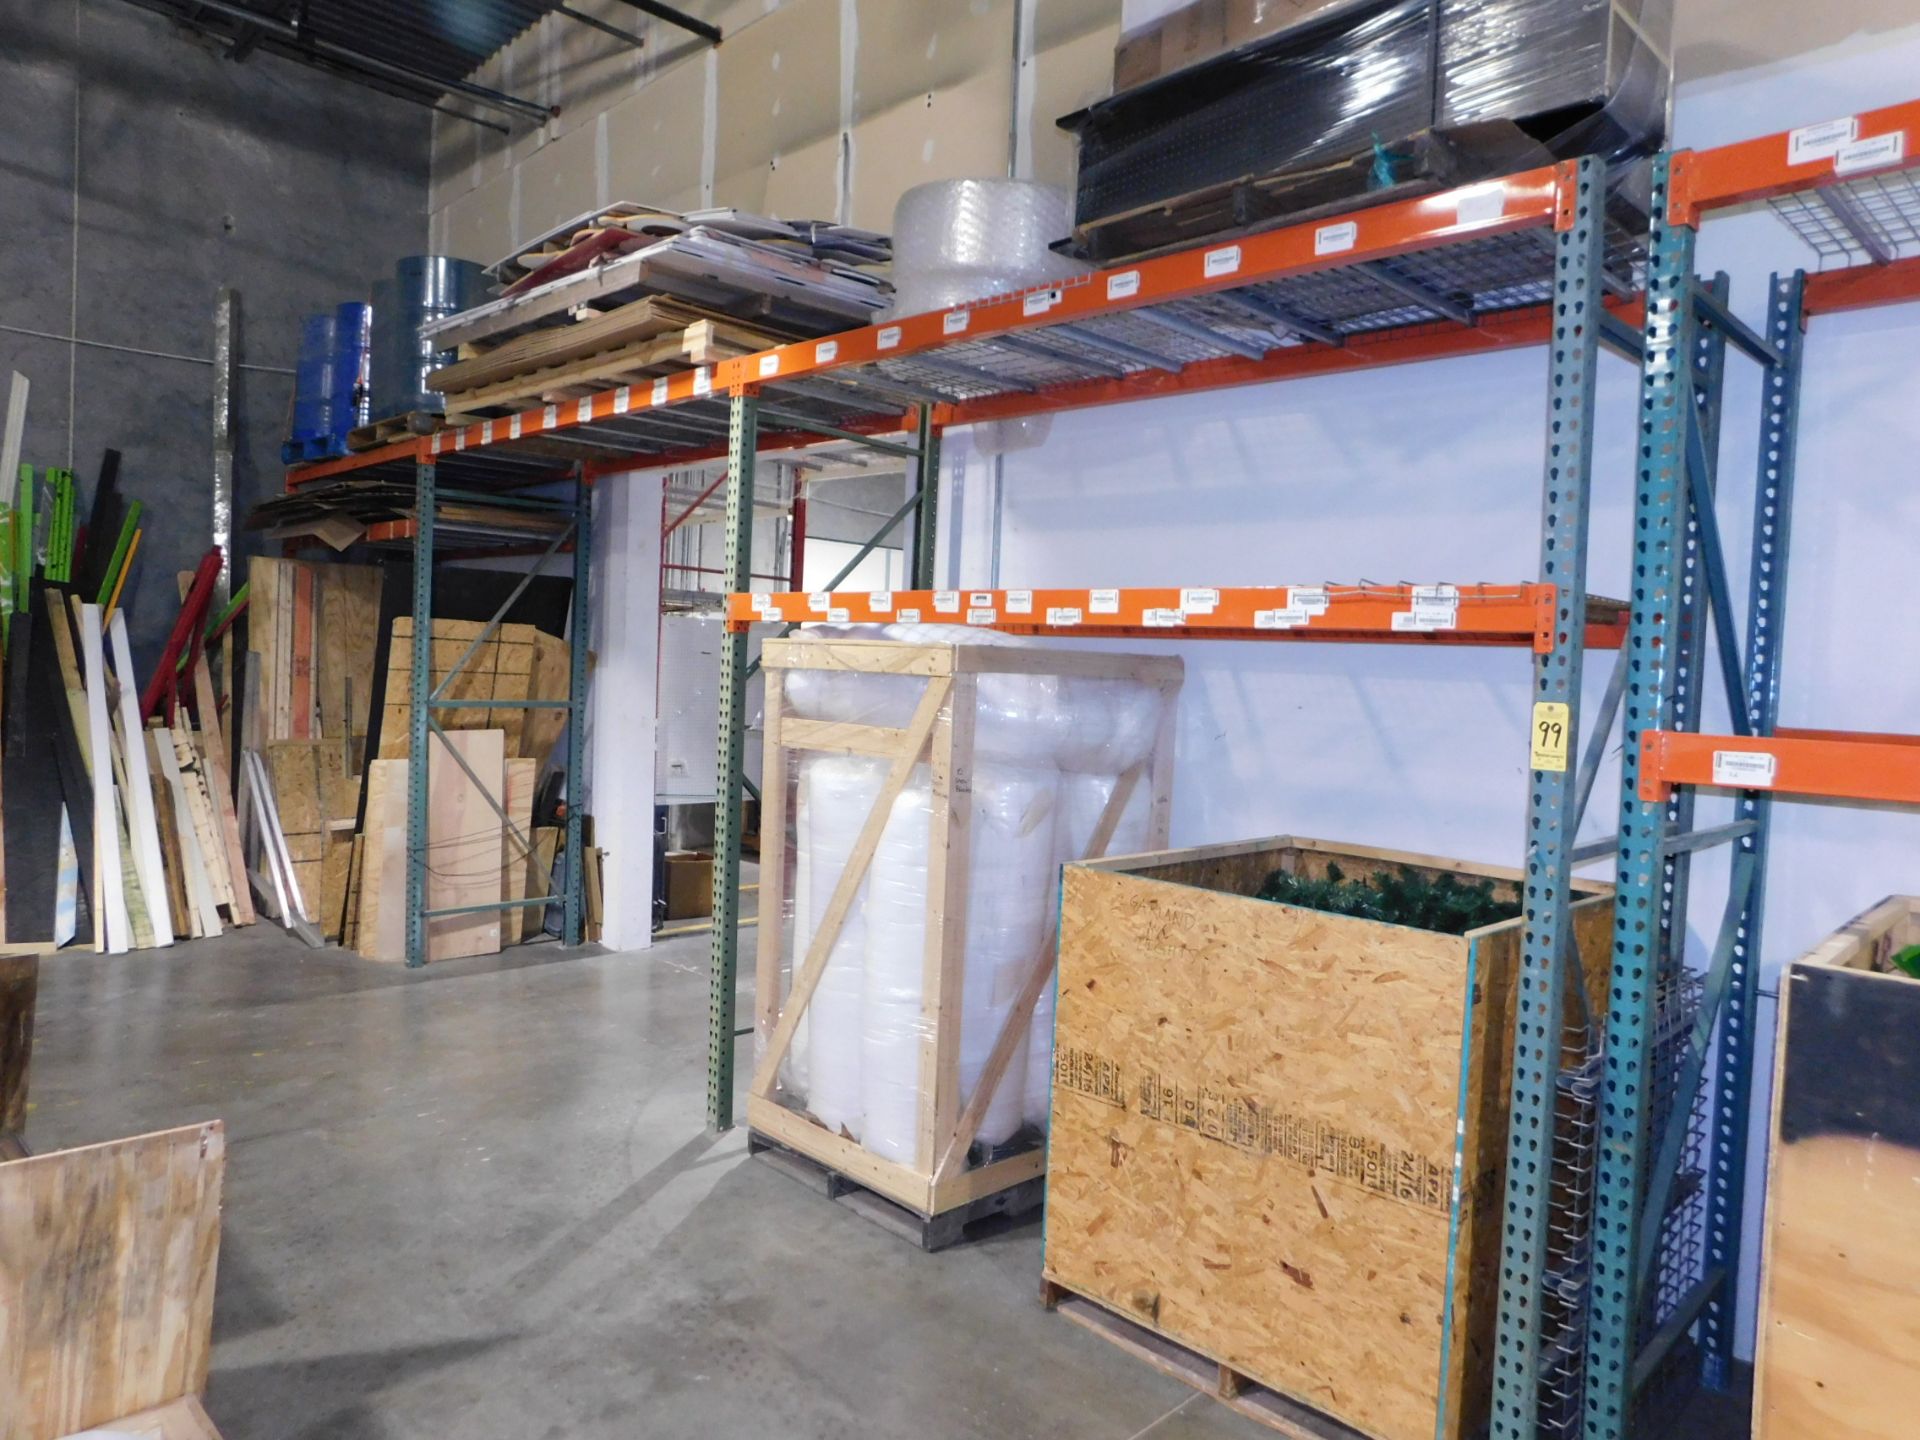 Interlake Pallet Shelving, (3) Sections, (2) 10' H x 10" W x 42" D, and (1) 10' H x 8' W x 42" D,